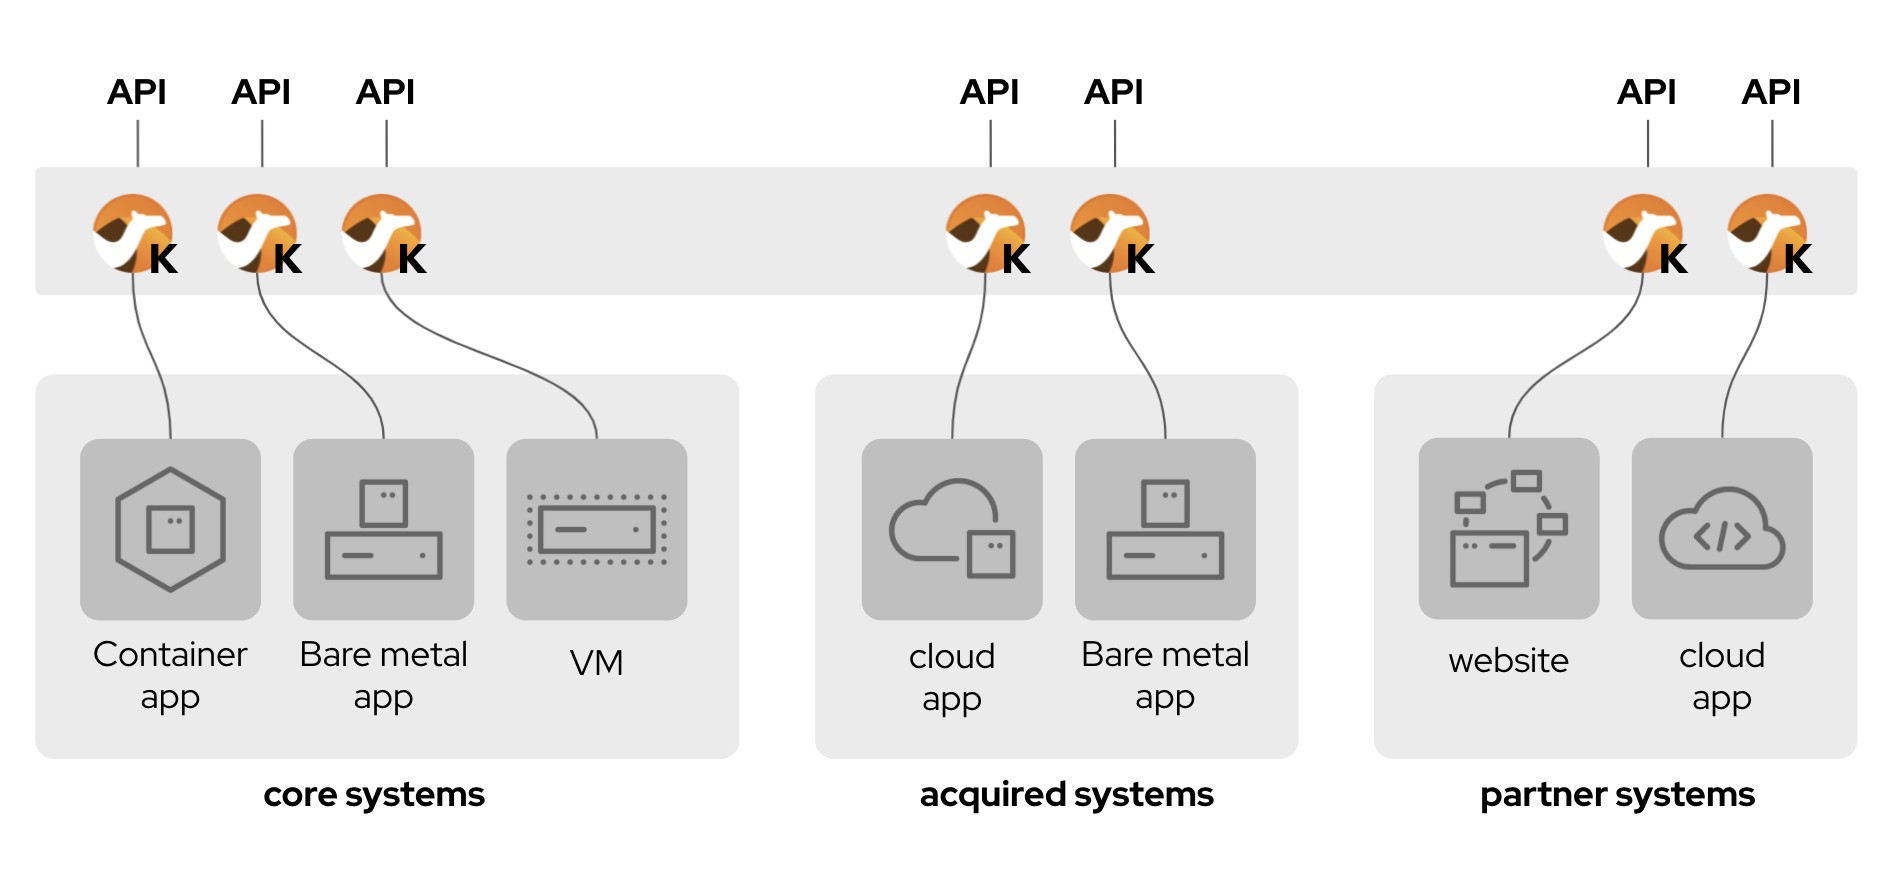 The API layer normalizes and exposes access to core systems, and extends to acquired and partner systems.